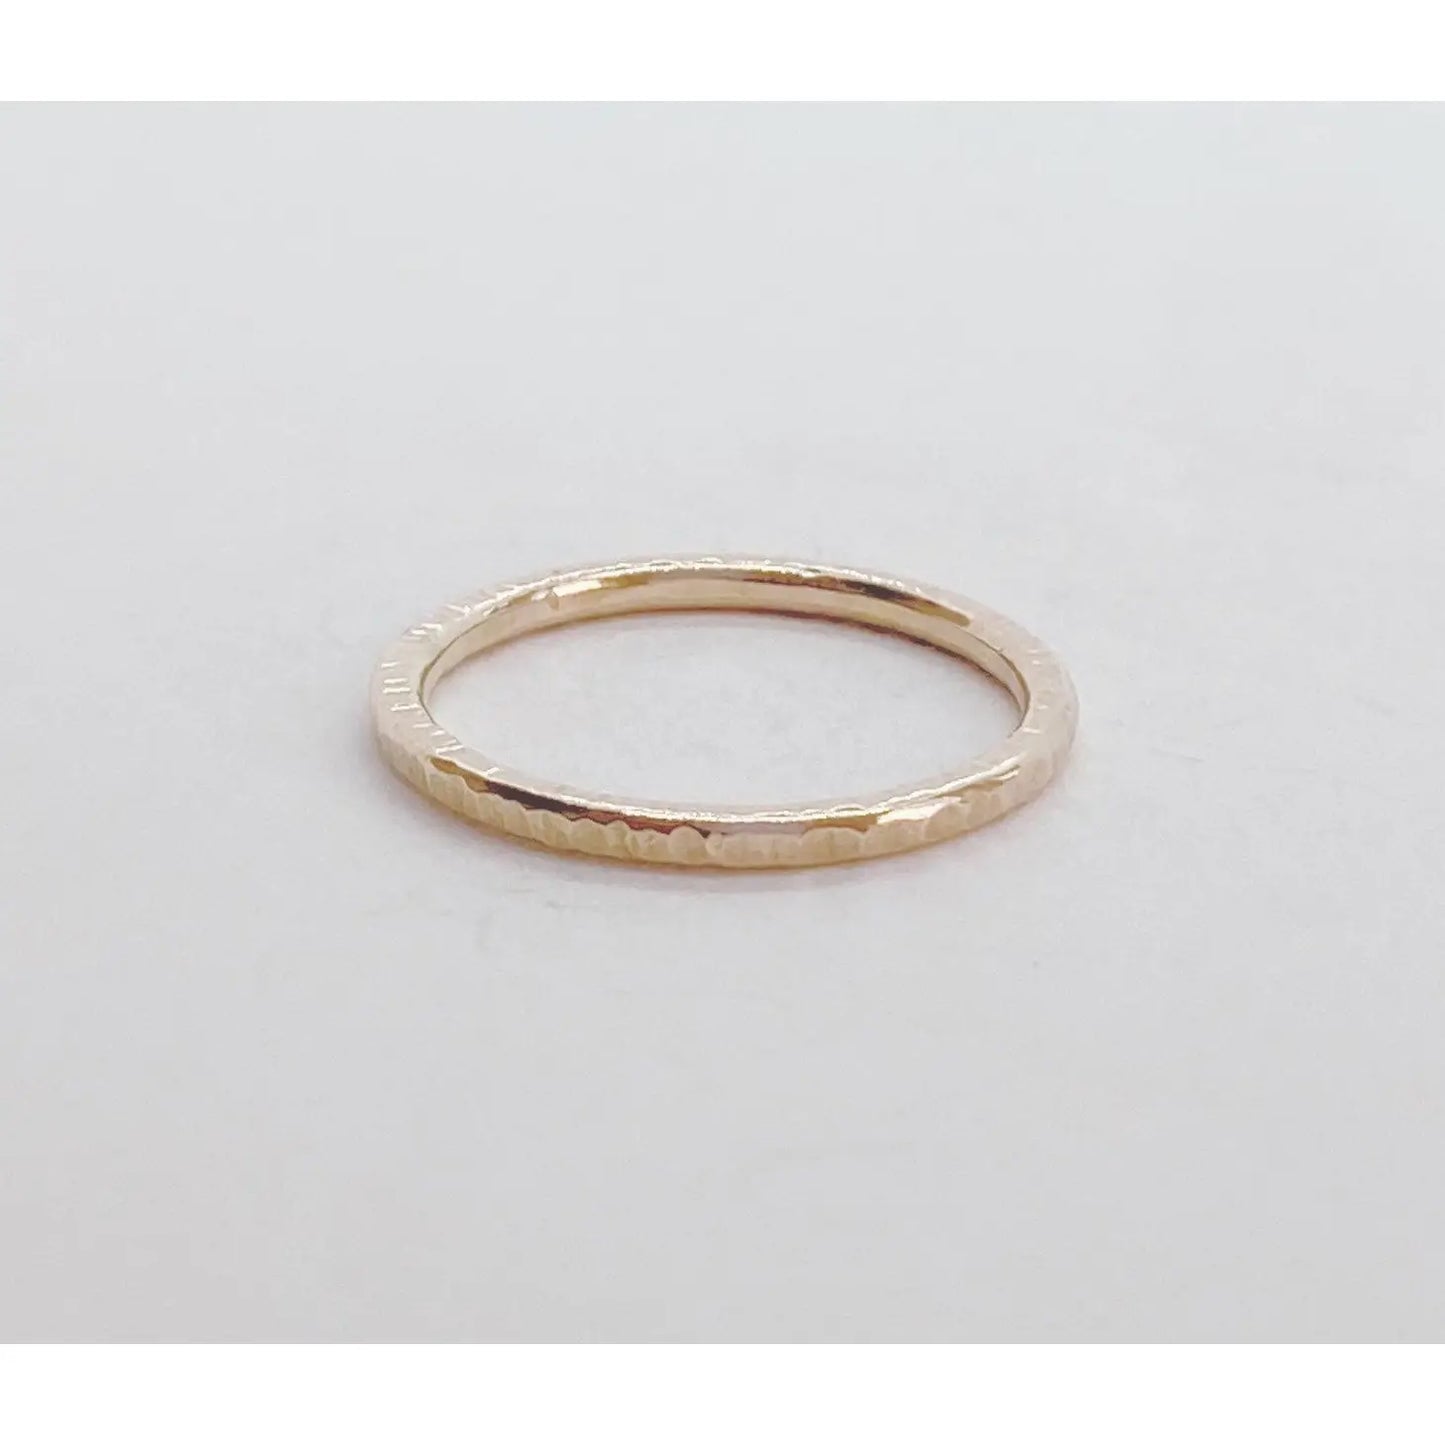 Bark Textured Ring (Gold, Silver)